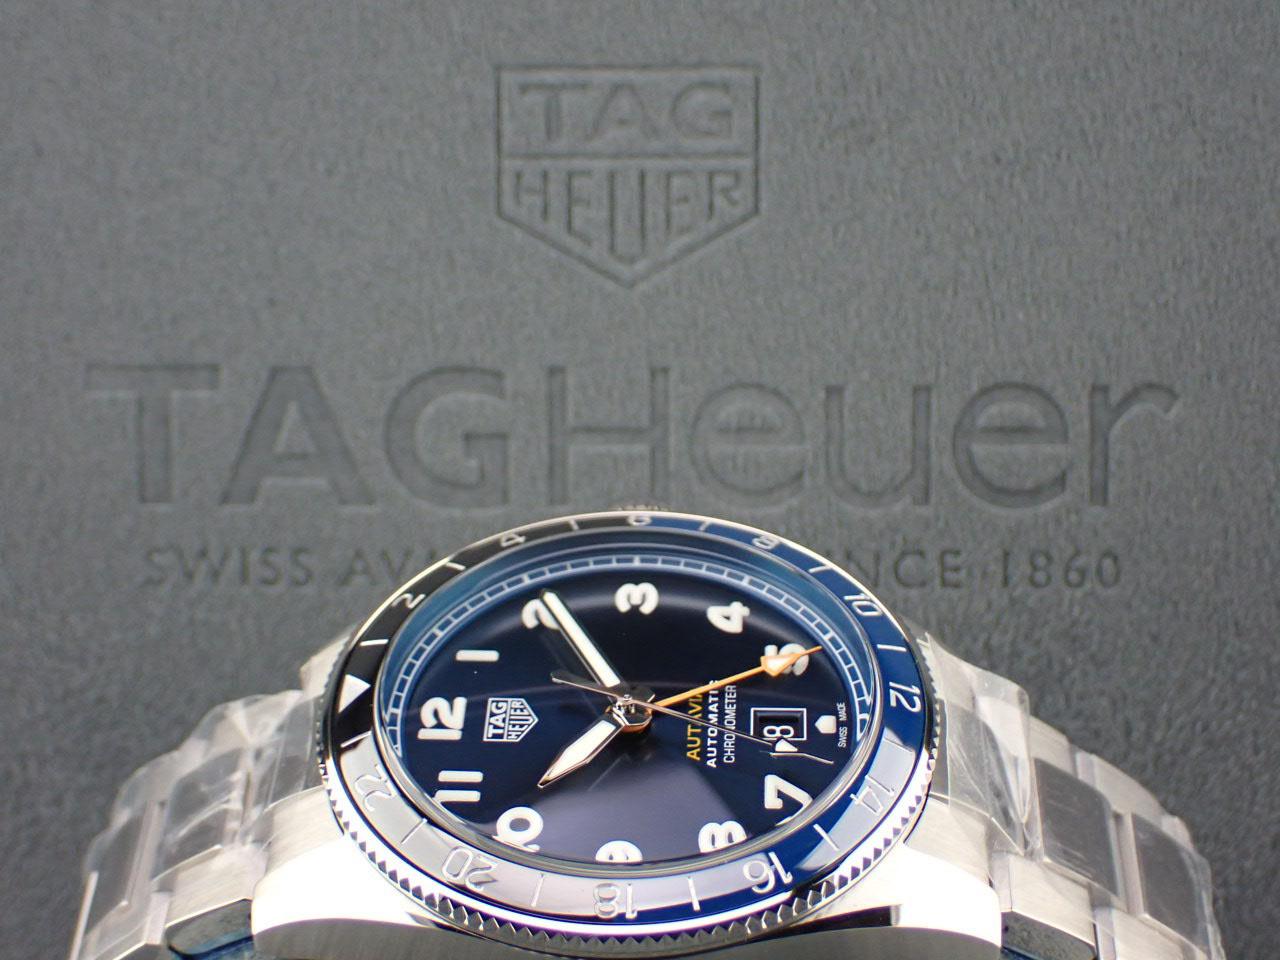 tagheuer-WBE511A-BA0650-review